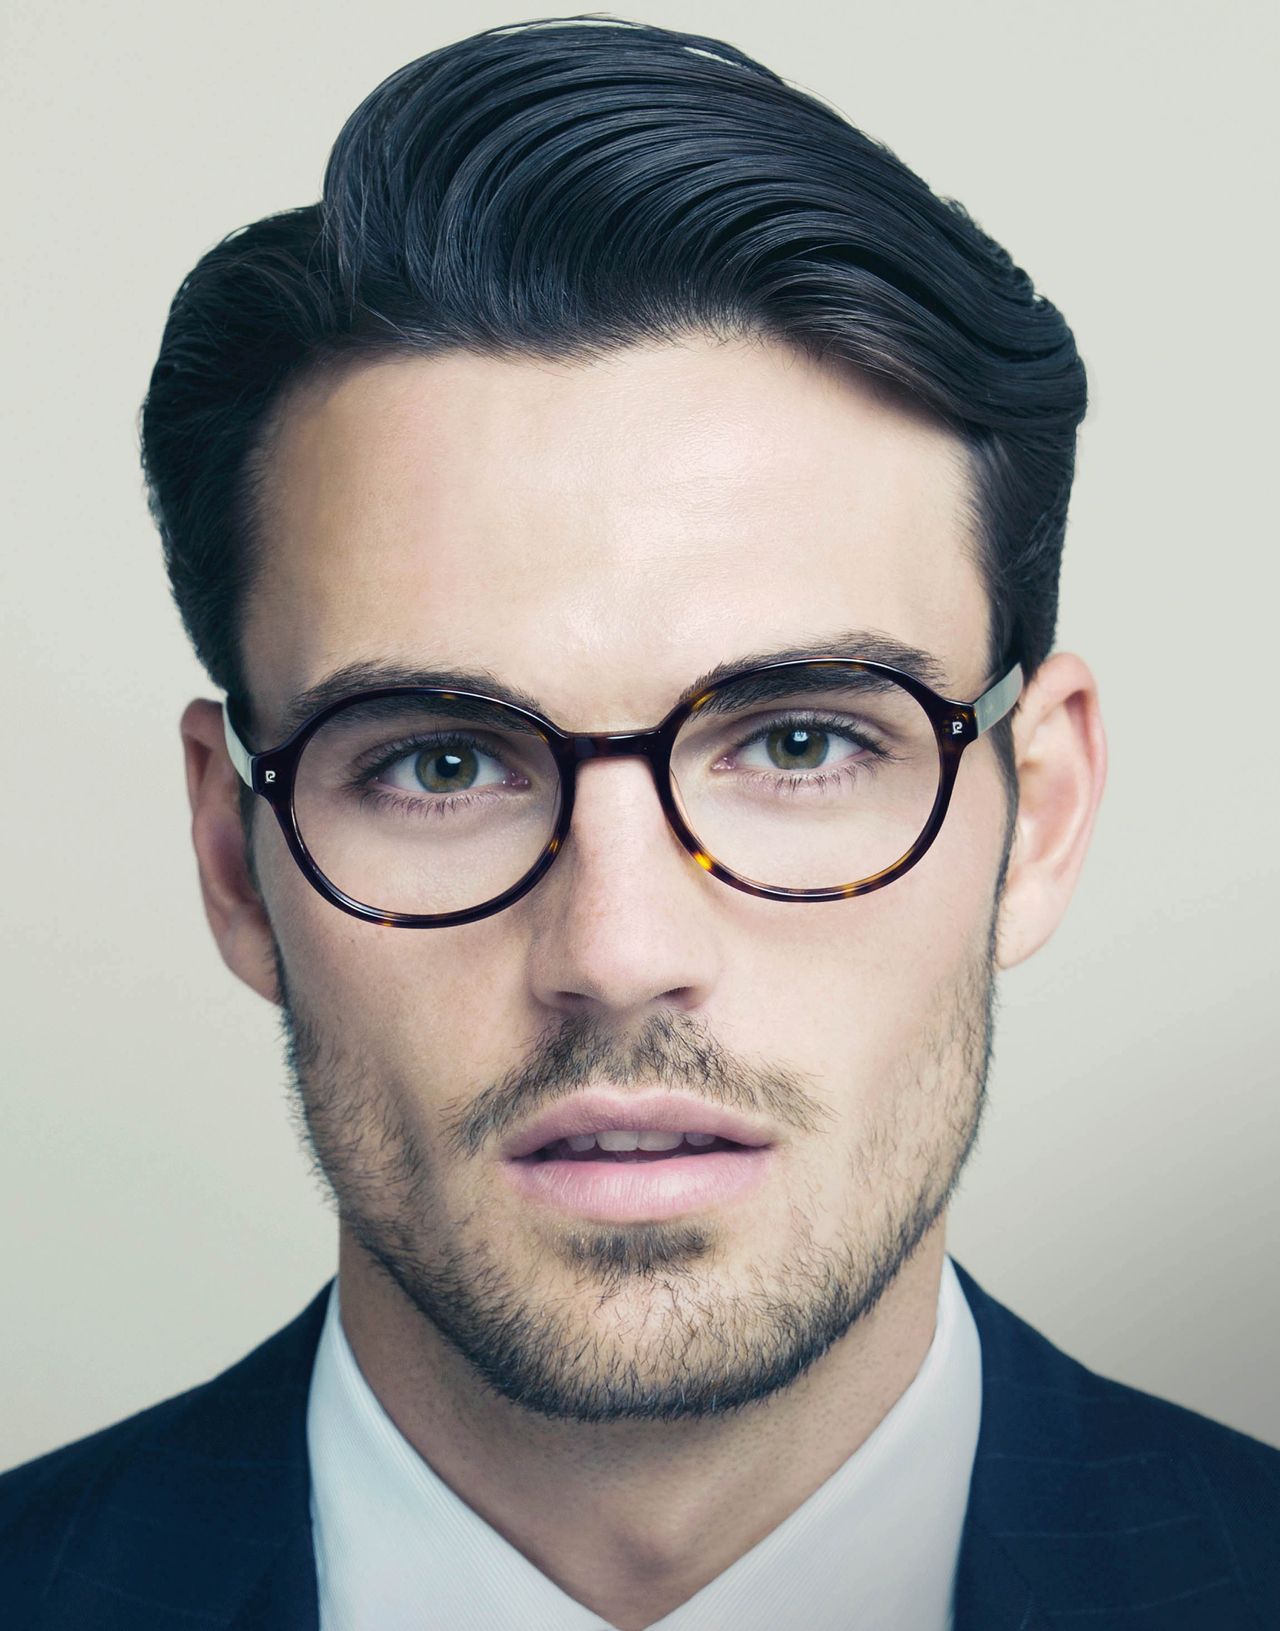 Hipster Haircut For Men 2015 | Pierre cardin, Glass and Haircuts